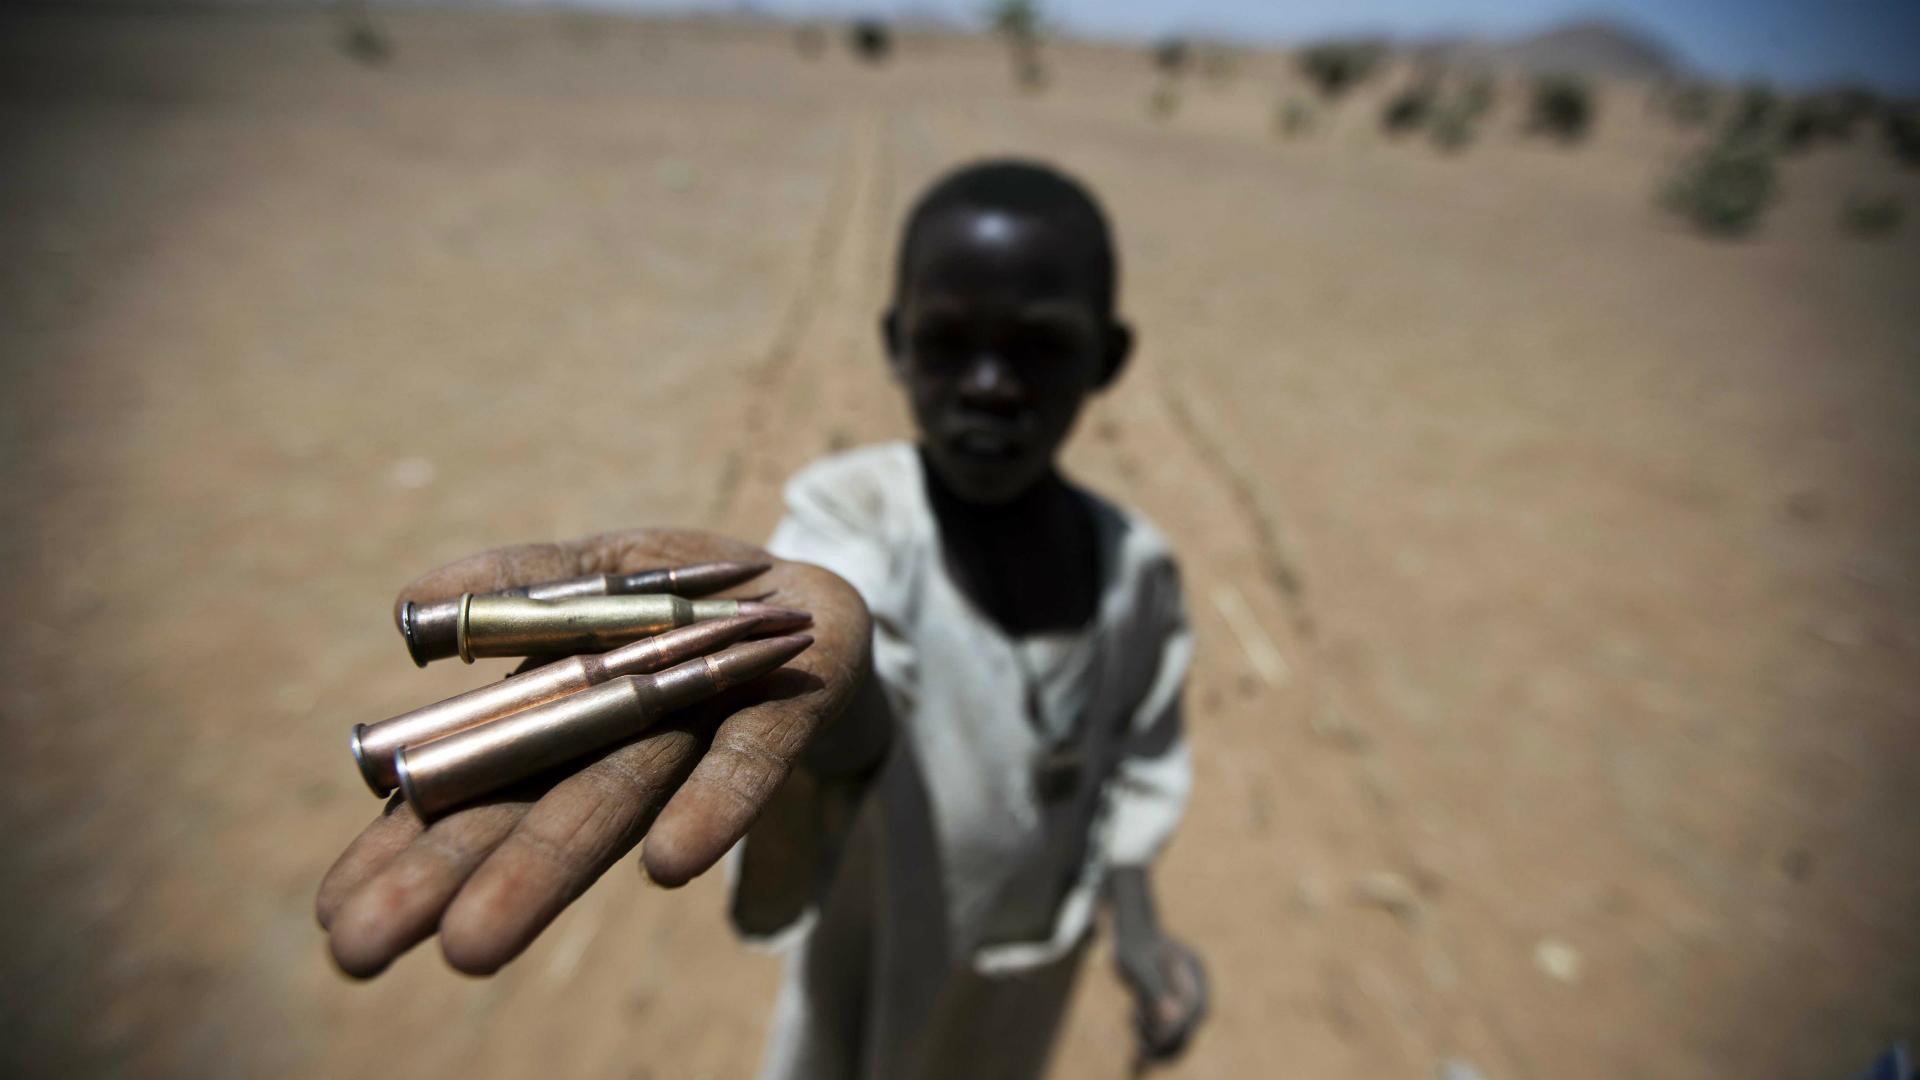 A child holds bullets picked from the ground, in Rounyn, a village located about 15 kilometers north of Shangil Tobaya, North Darfur, Sudan, on March 27, 2011.